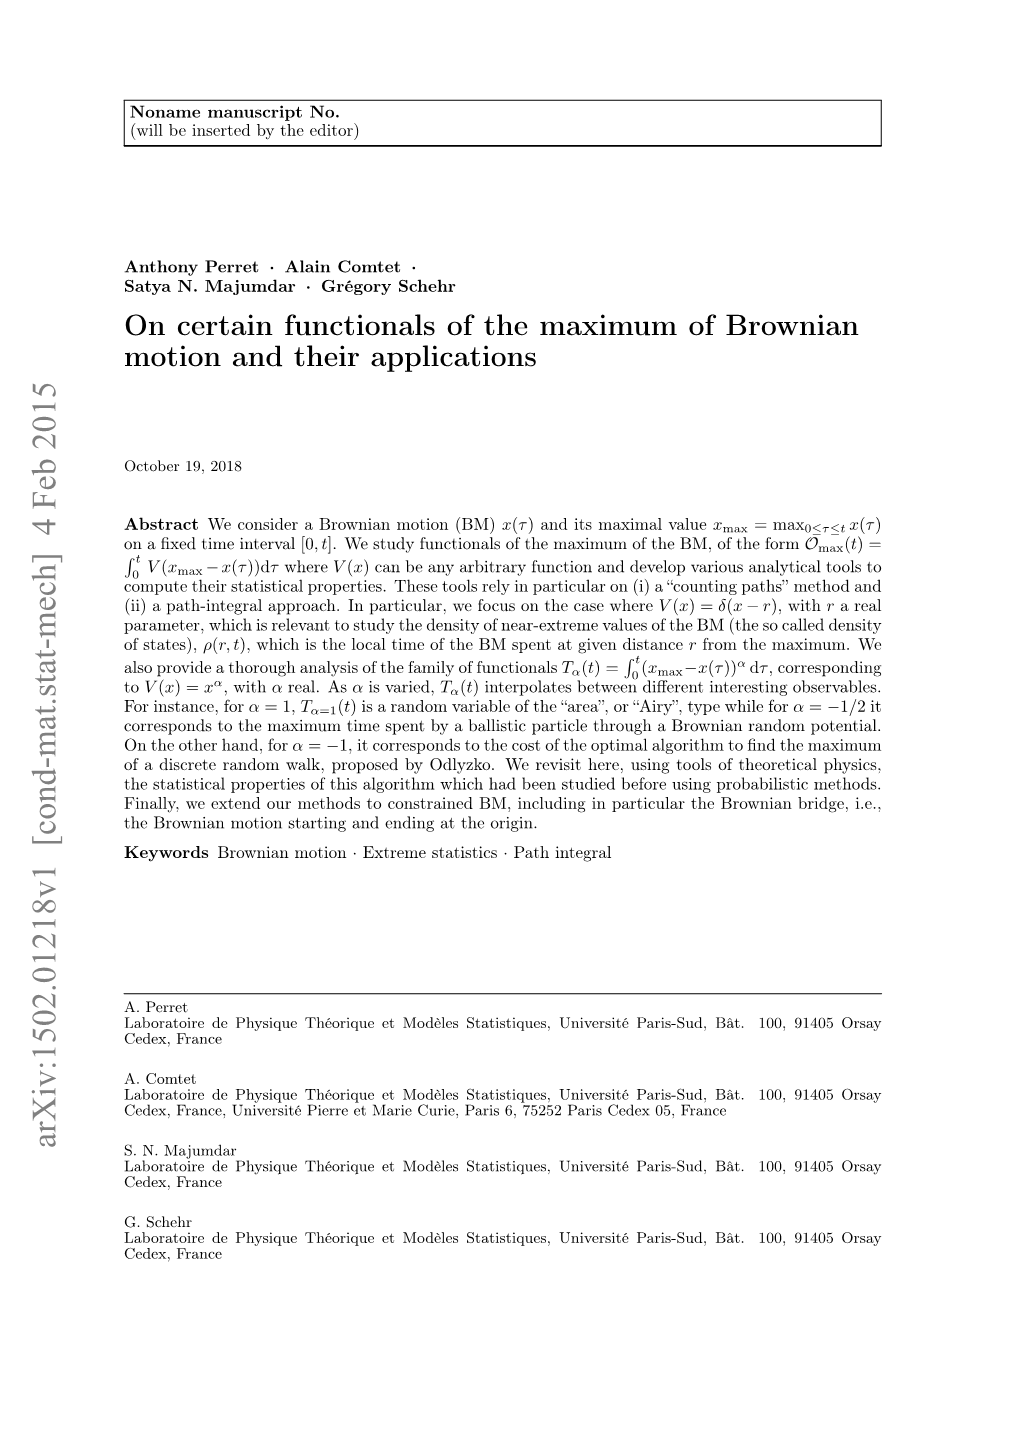 On Certain Functionals of the Maximum of Brownian Motion and Their Applications